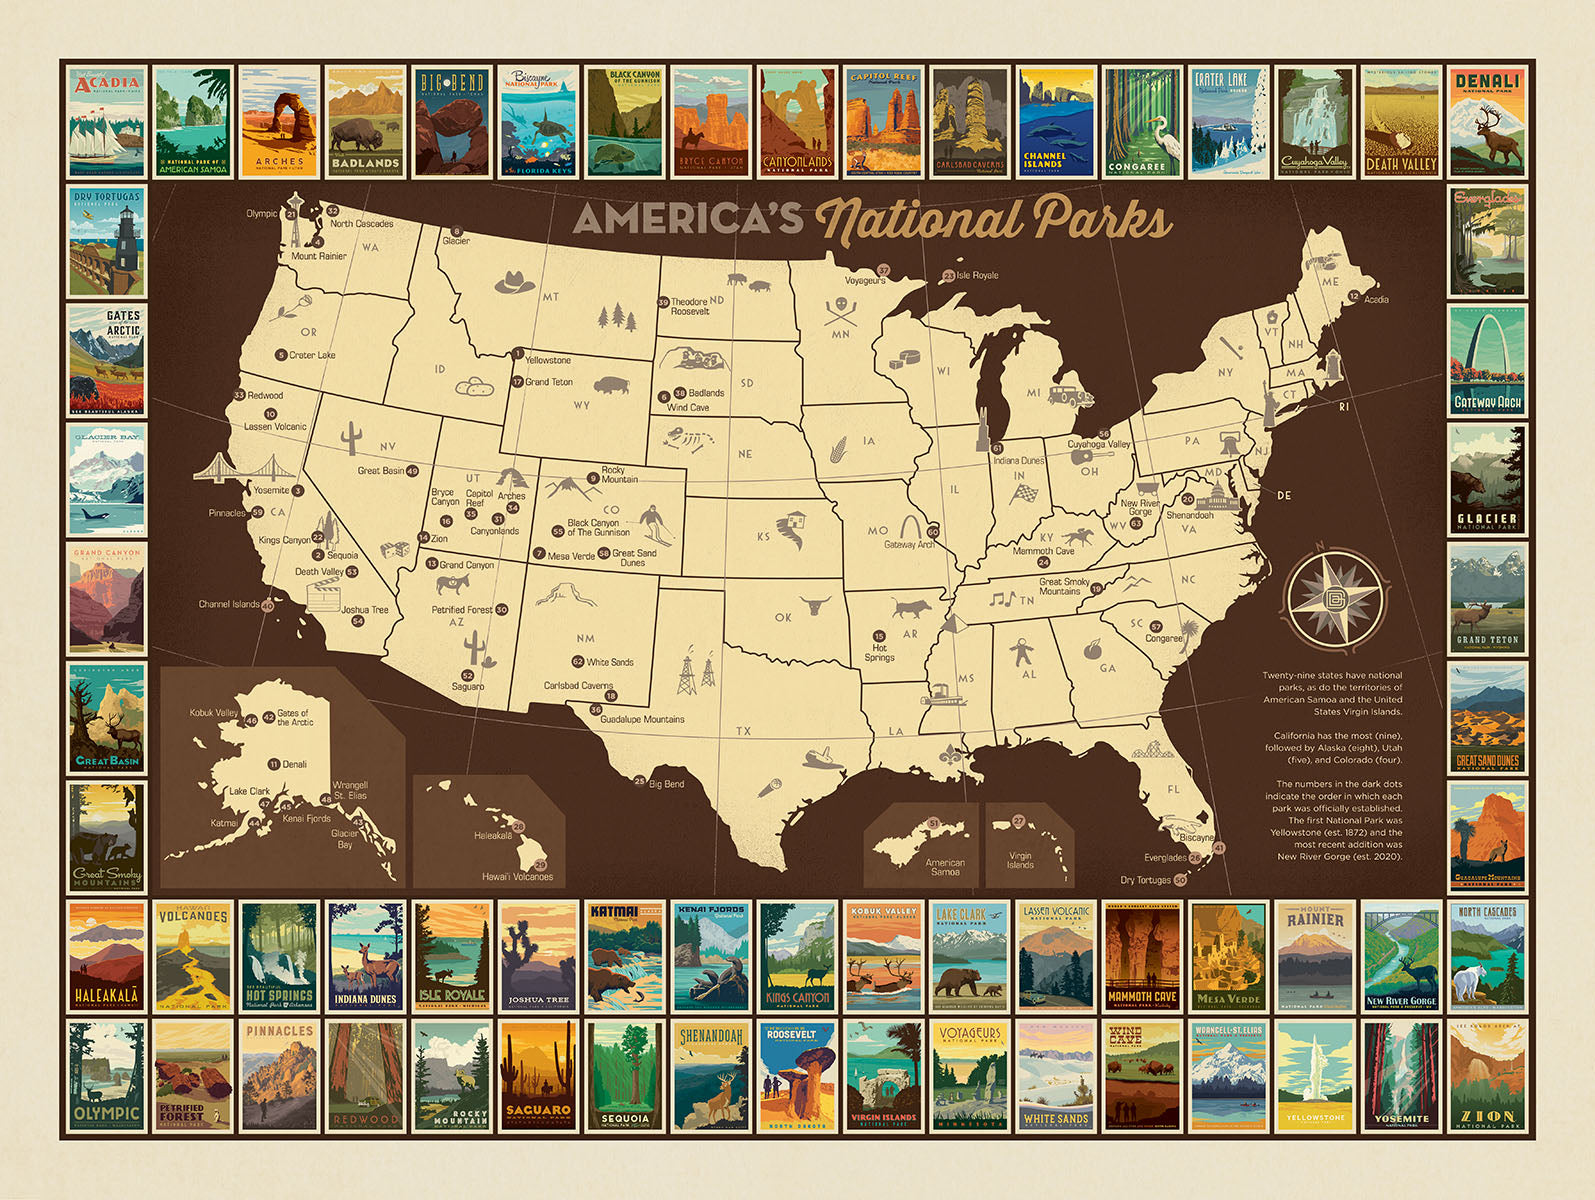 Enjoy Free Entry into the National Parks on These Days in 2023!